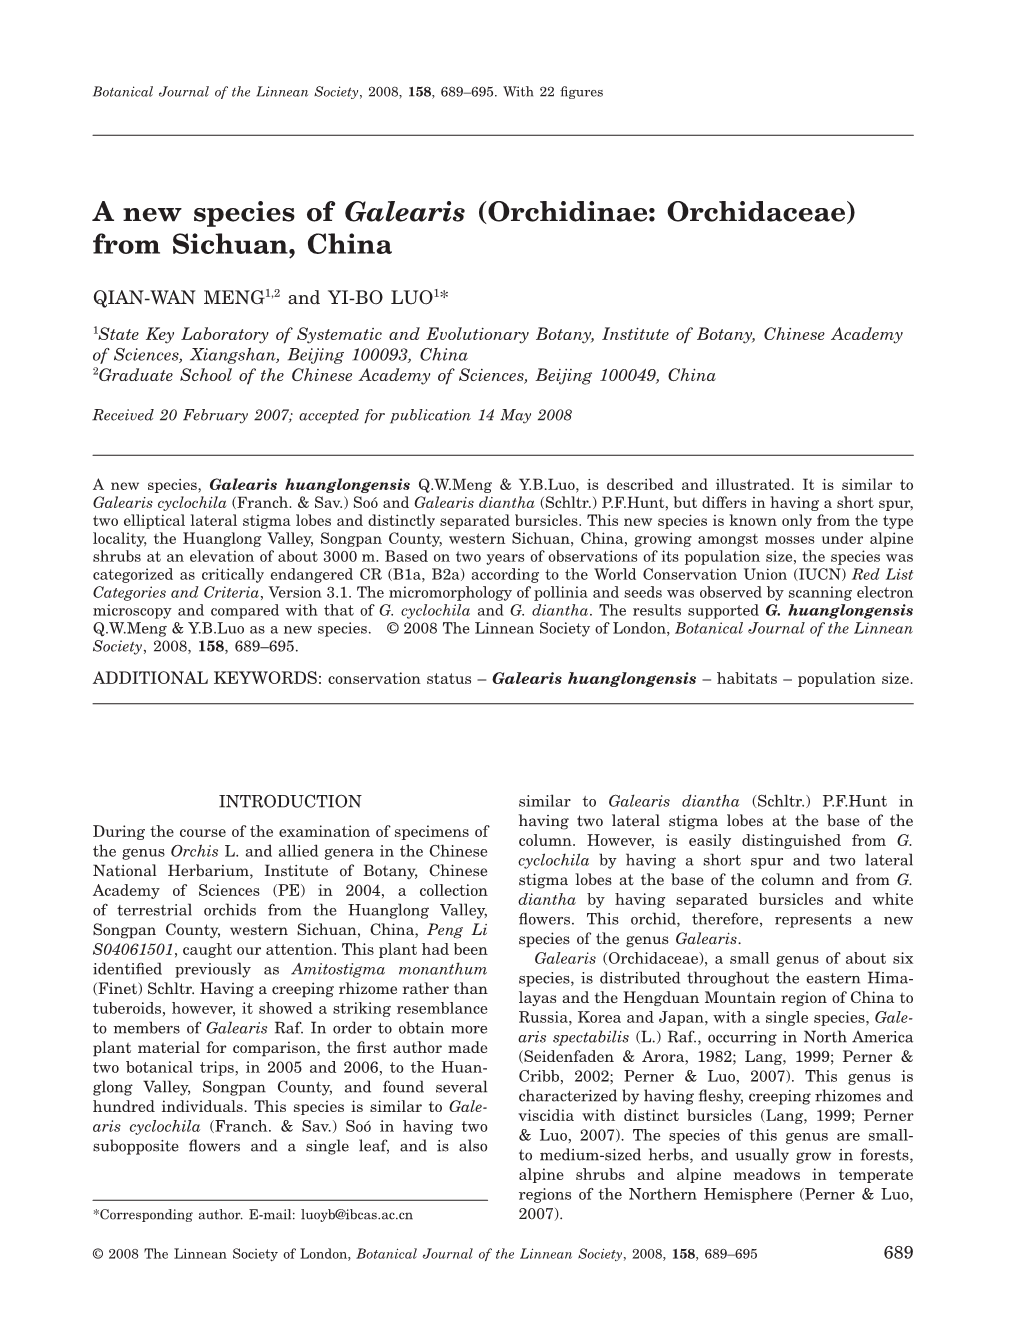 A New Species of Galearis (Orchidinae: Orchidaceae) from Sichuan, China